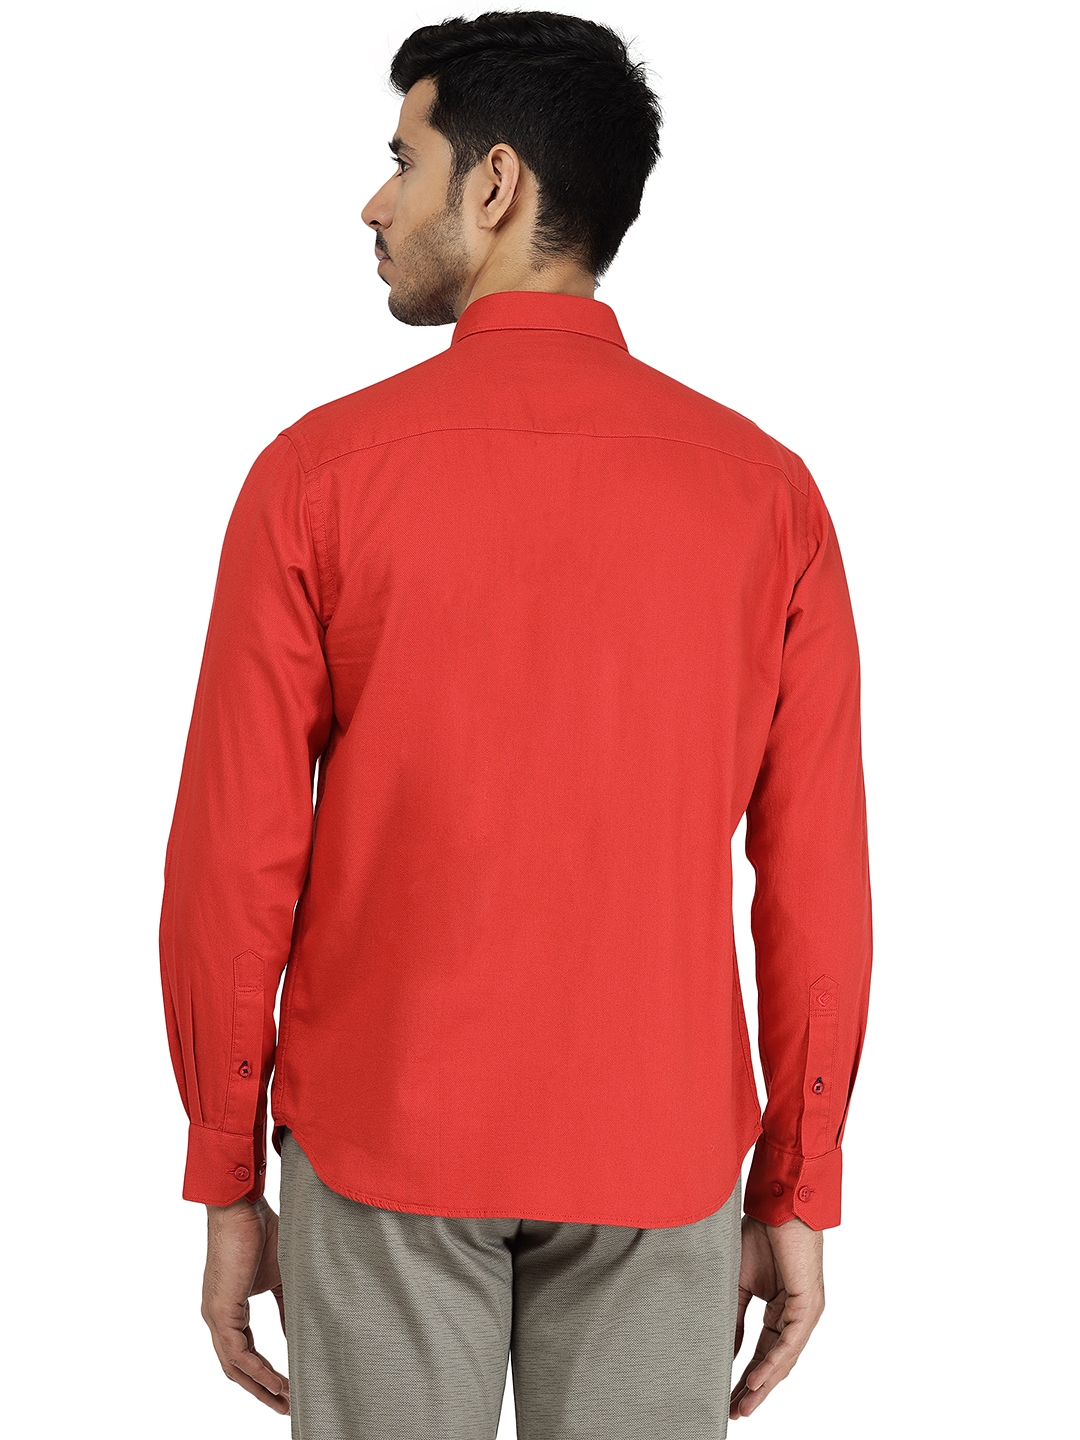 Greenfibre | Paprika Red Solid Classic Fit Casual Shirt | Greenfibre 2